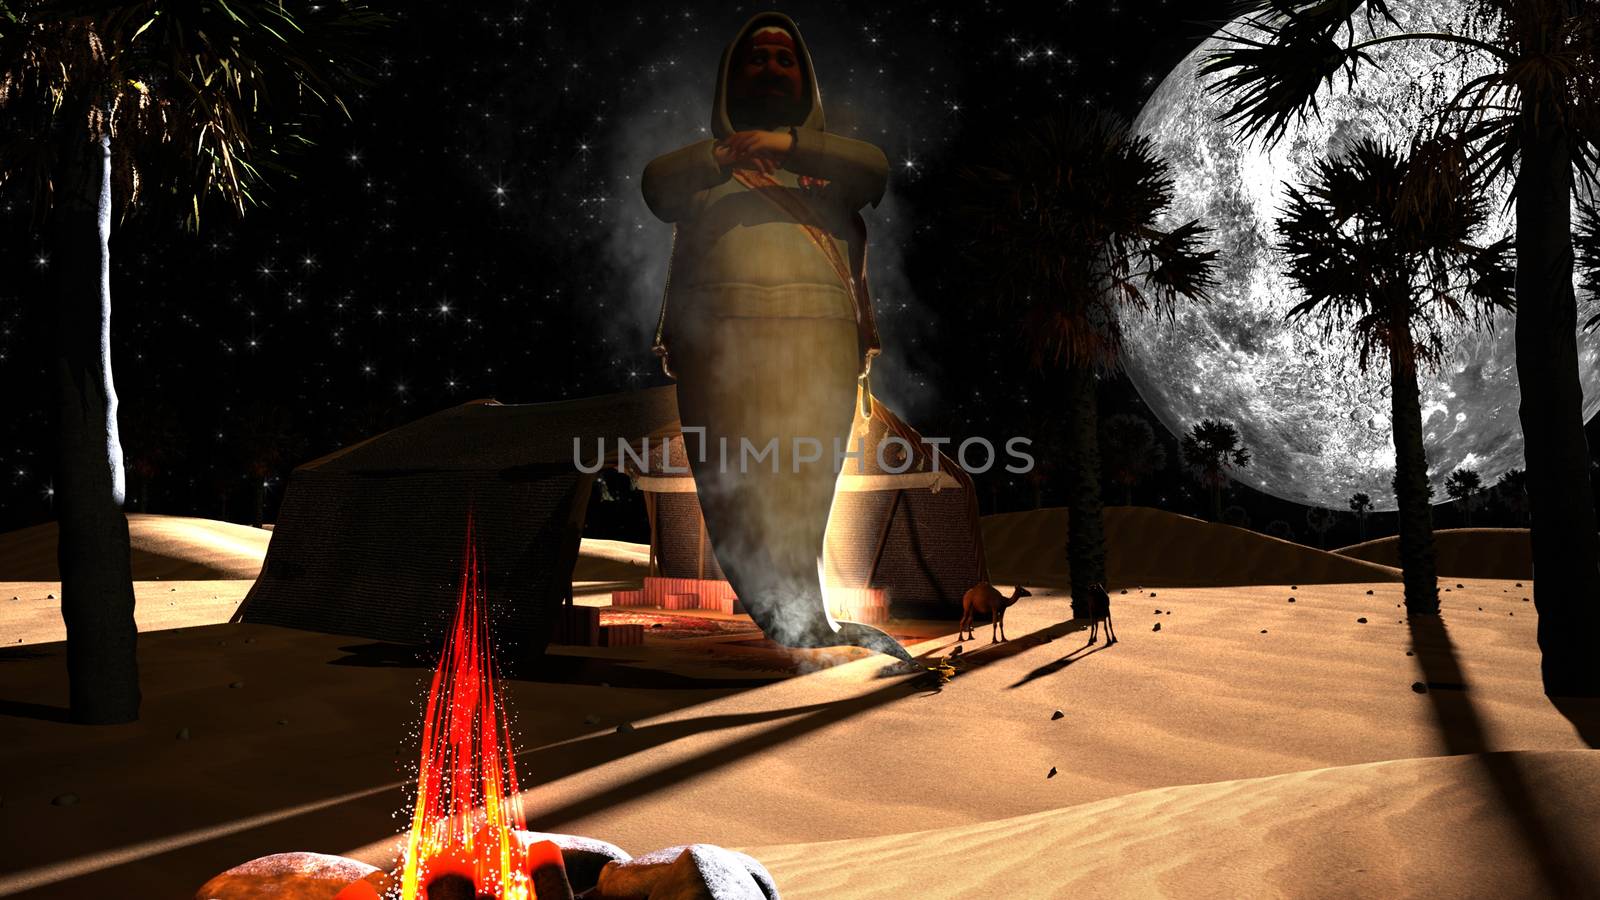 3D genie in an Arabian desert with palm trees, full moon and camels